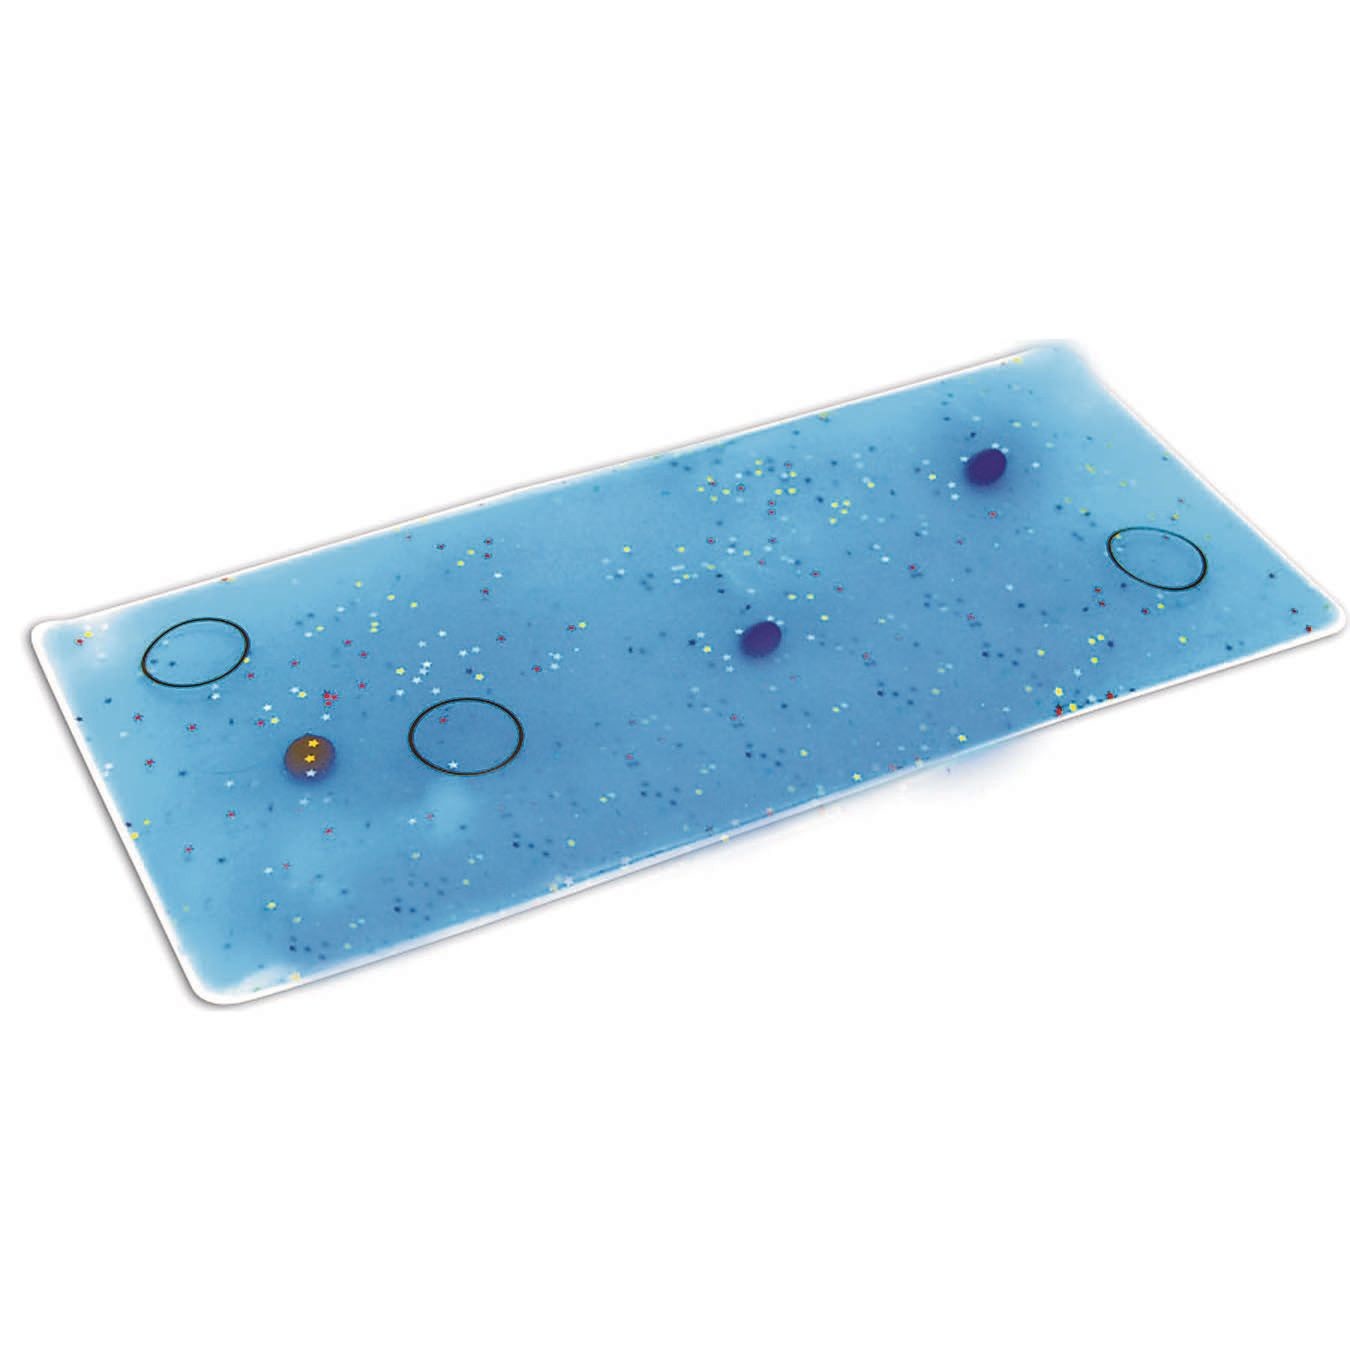 Buy Sensory Stimulation Worldwide with at Marbles S&S Gel Pad